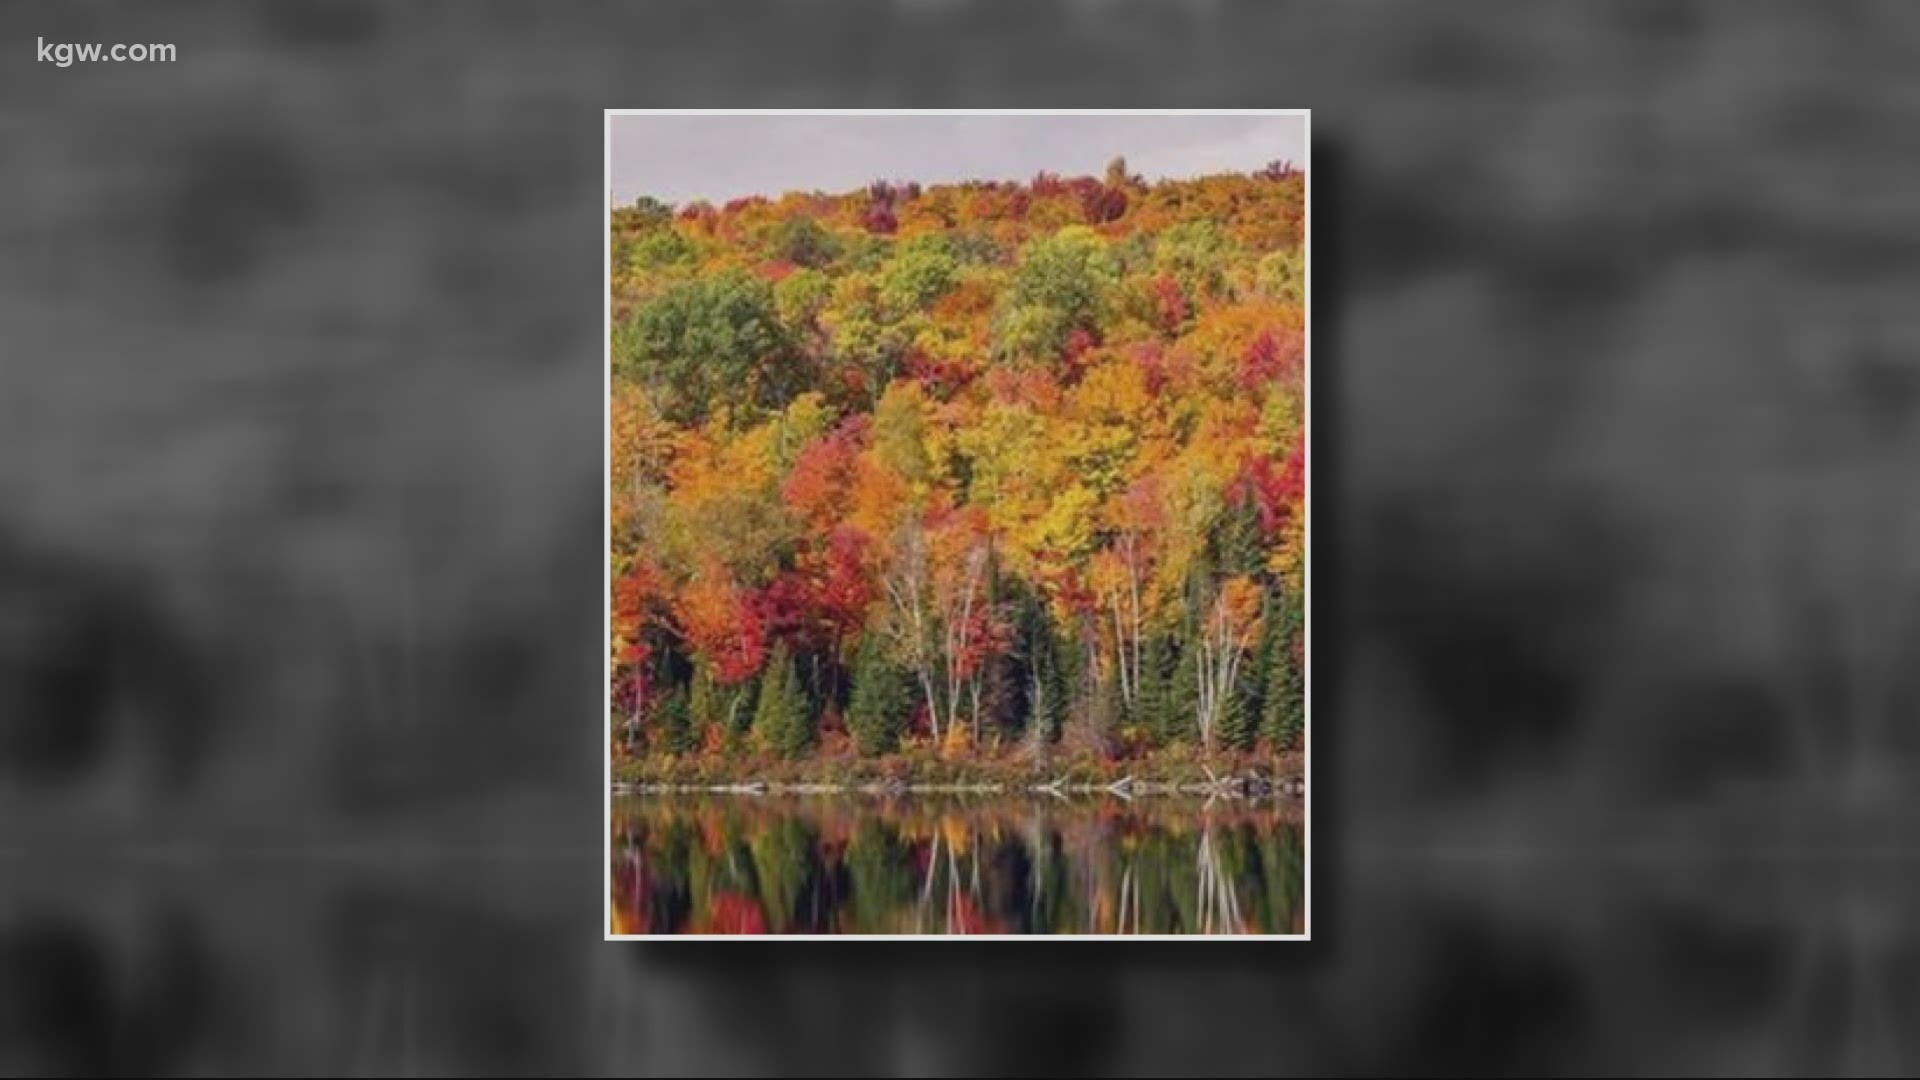 Visitors to Sandy can get a spectacular view of the fall colors on display, even if they happen to be colorblind.